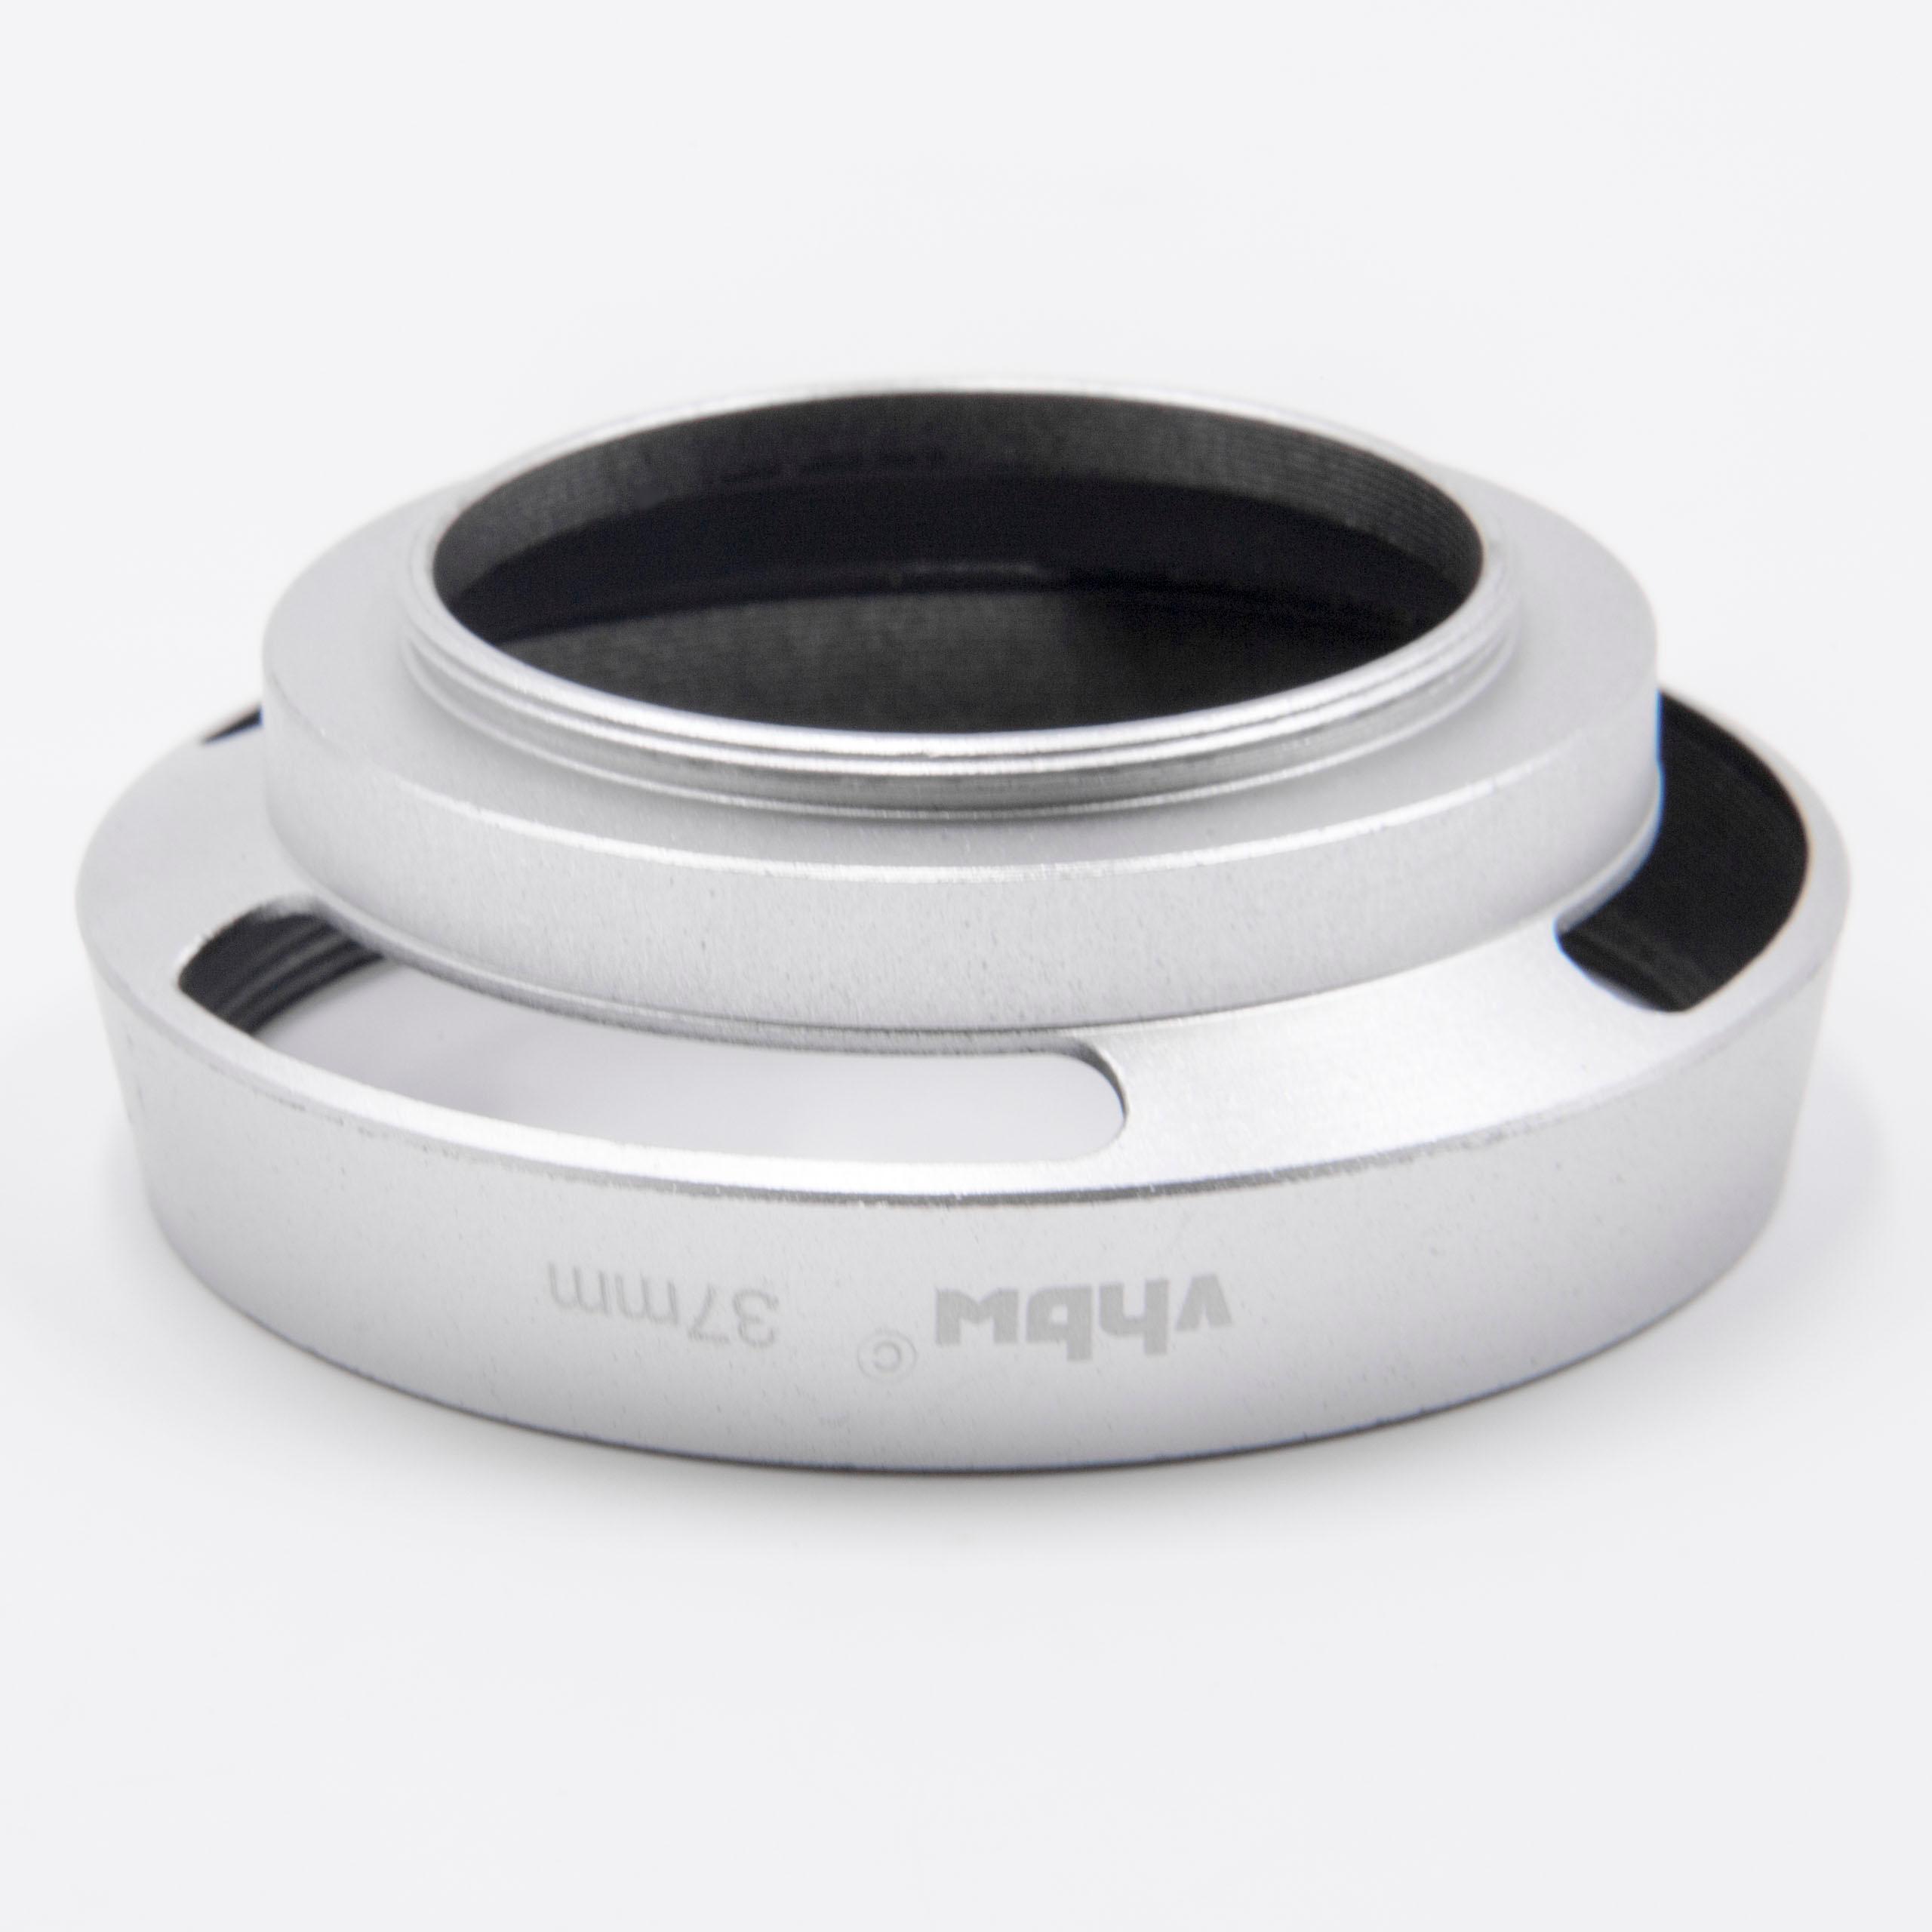 Lens Hood suitable for 37mm Lens - Lens Shade Silver, Round